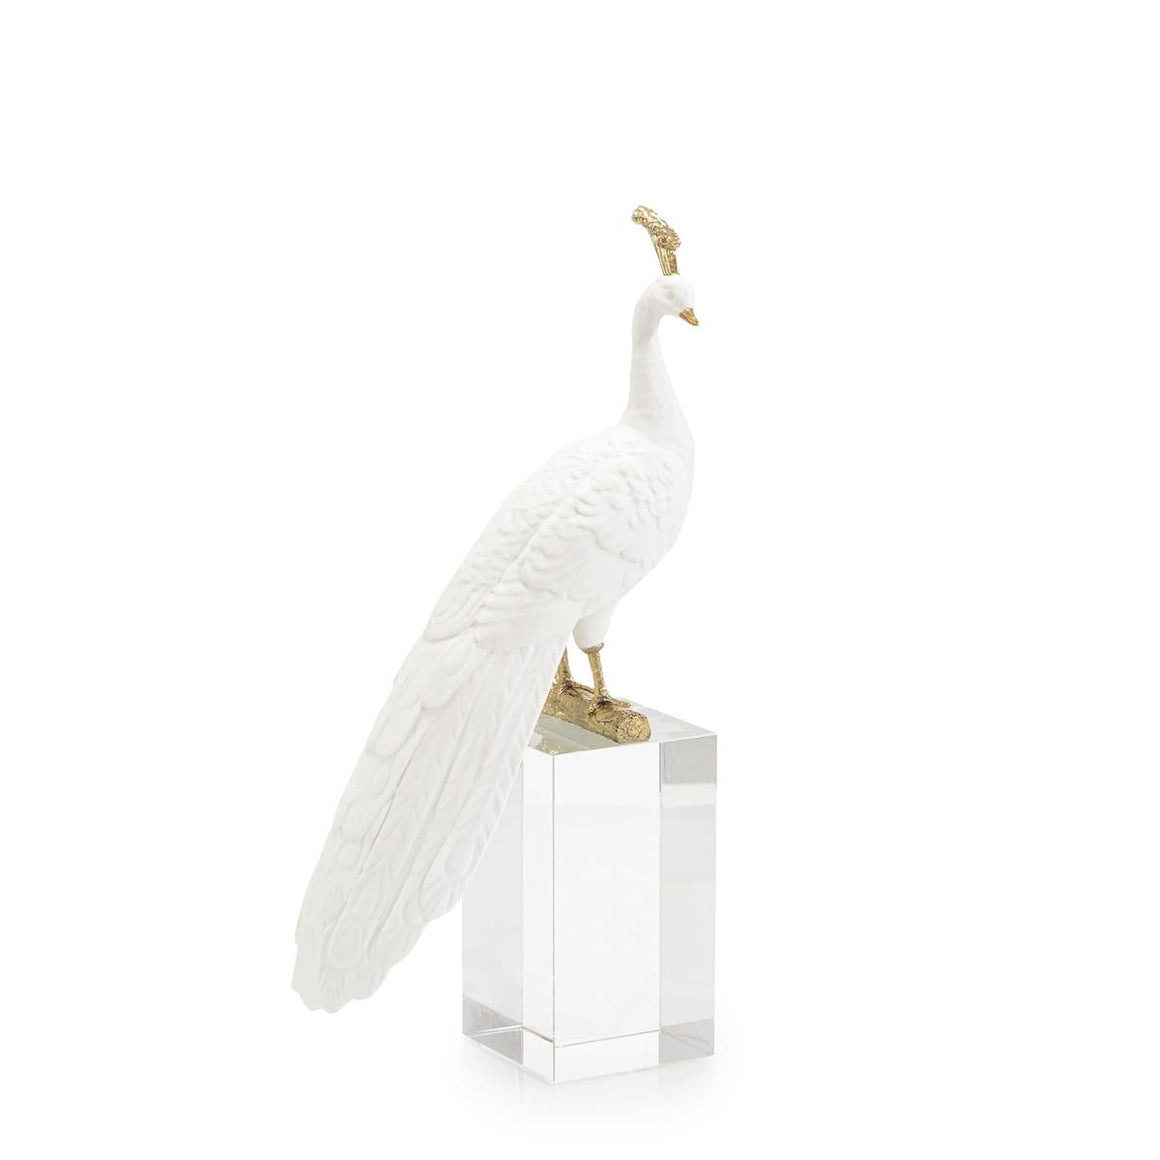 White Peacock Sculpture on Crystal Base II